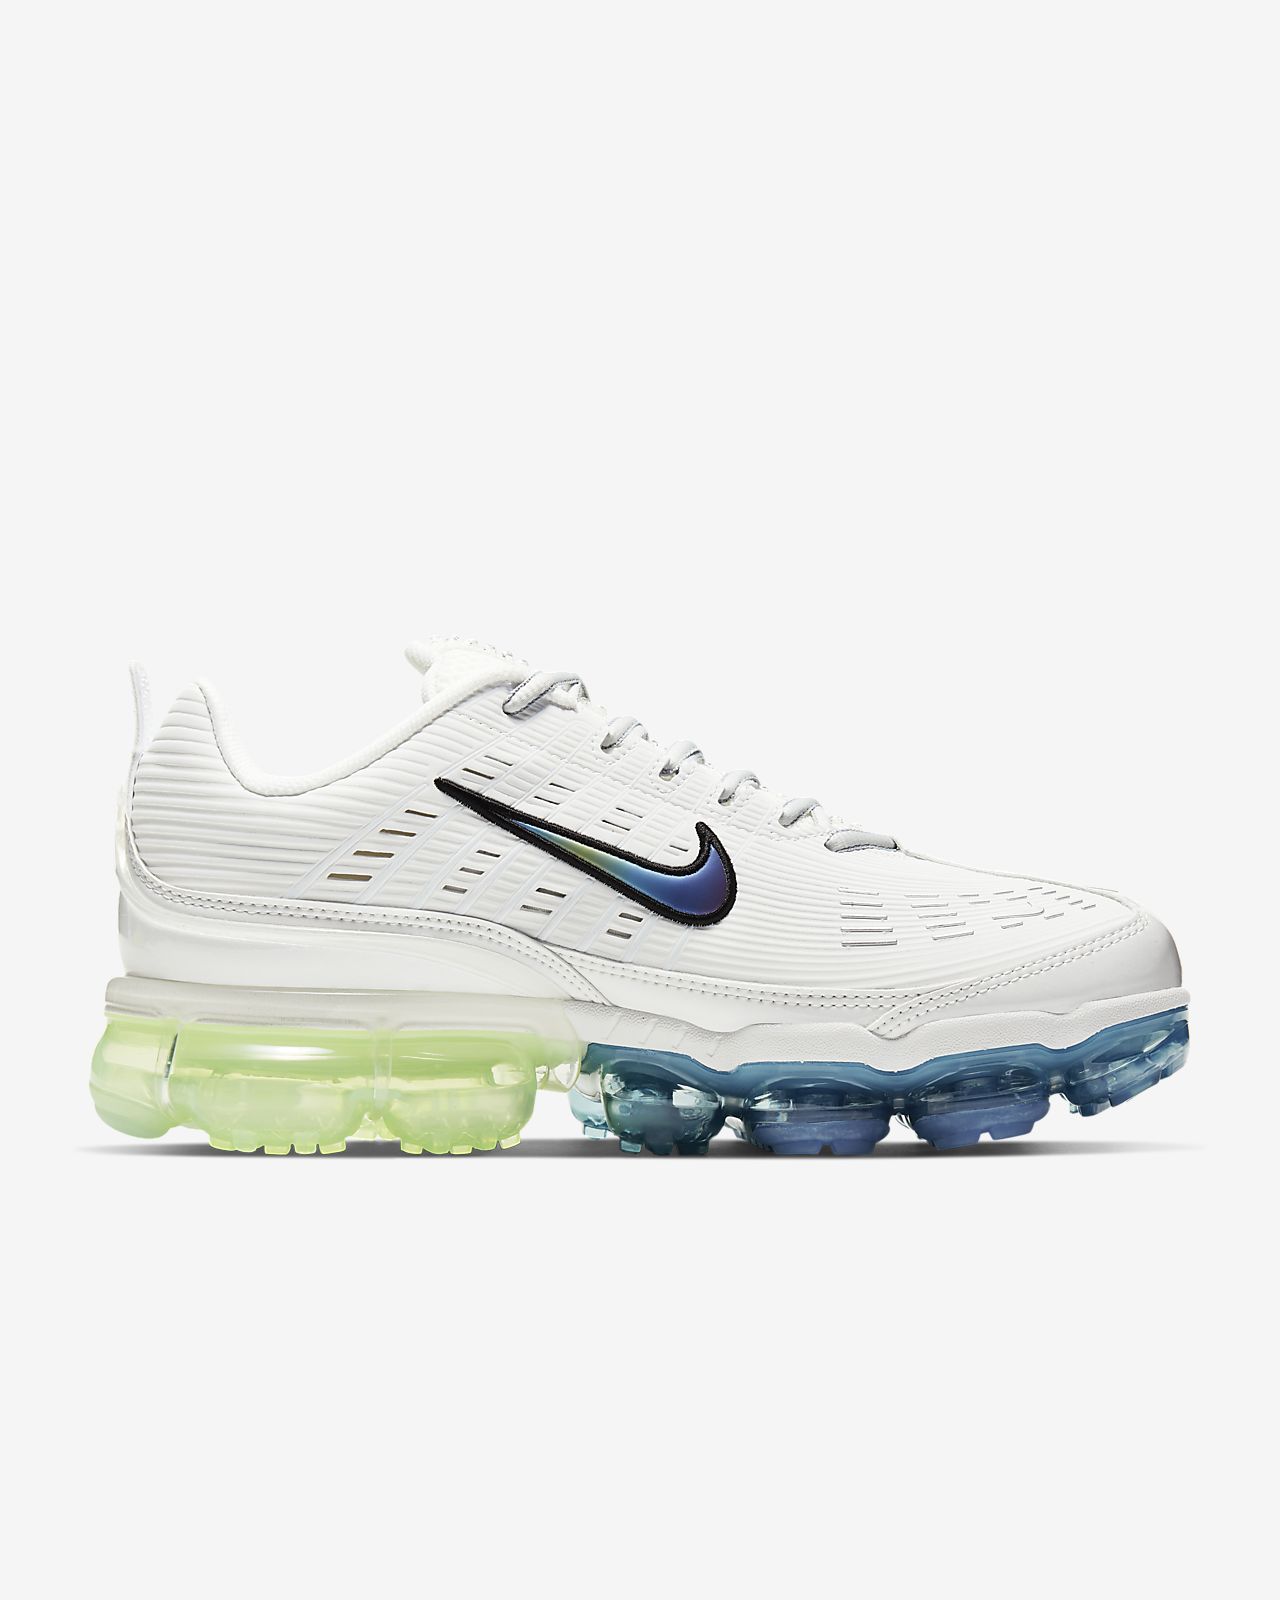 nike vapormax blue and green